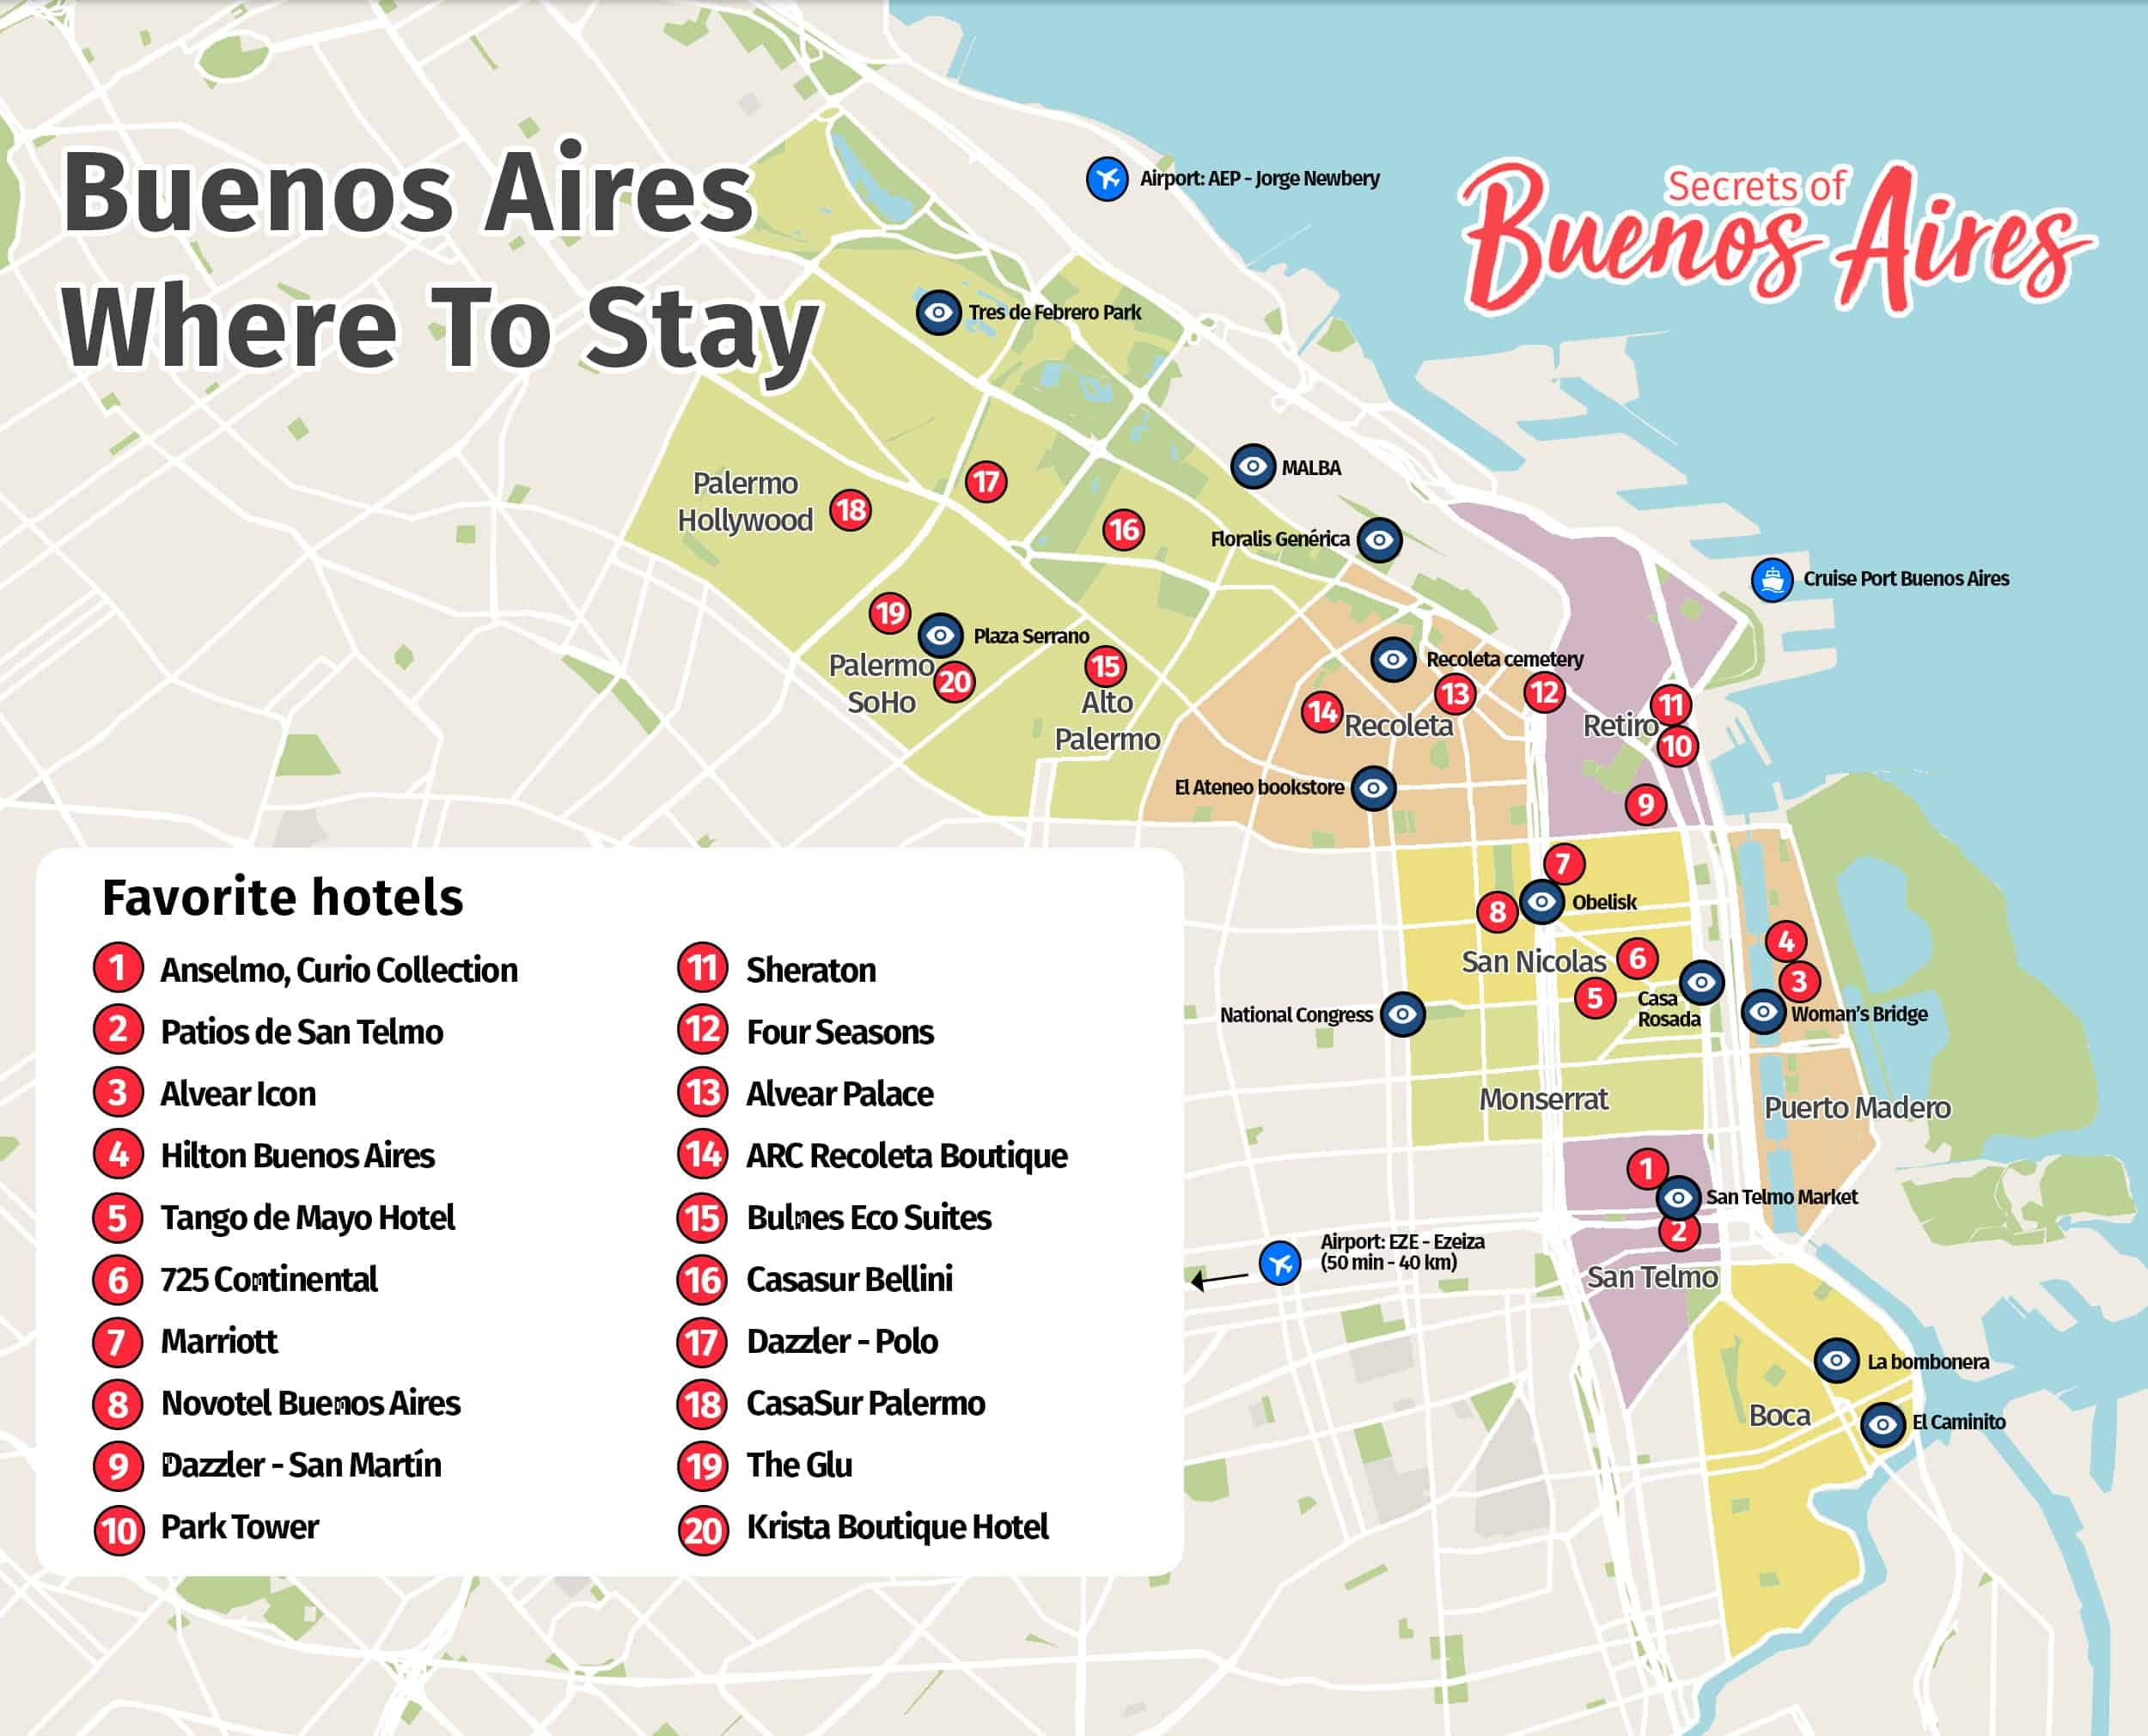 Where to stay in Buenos Aires